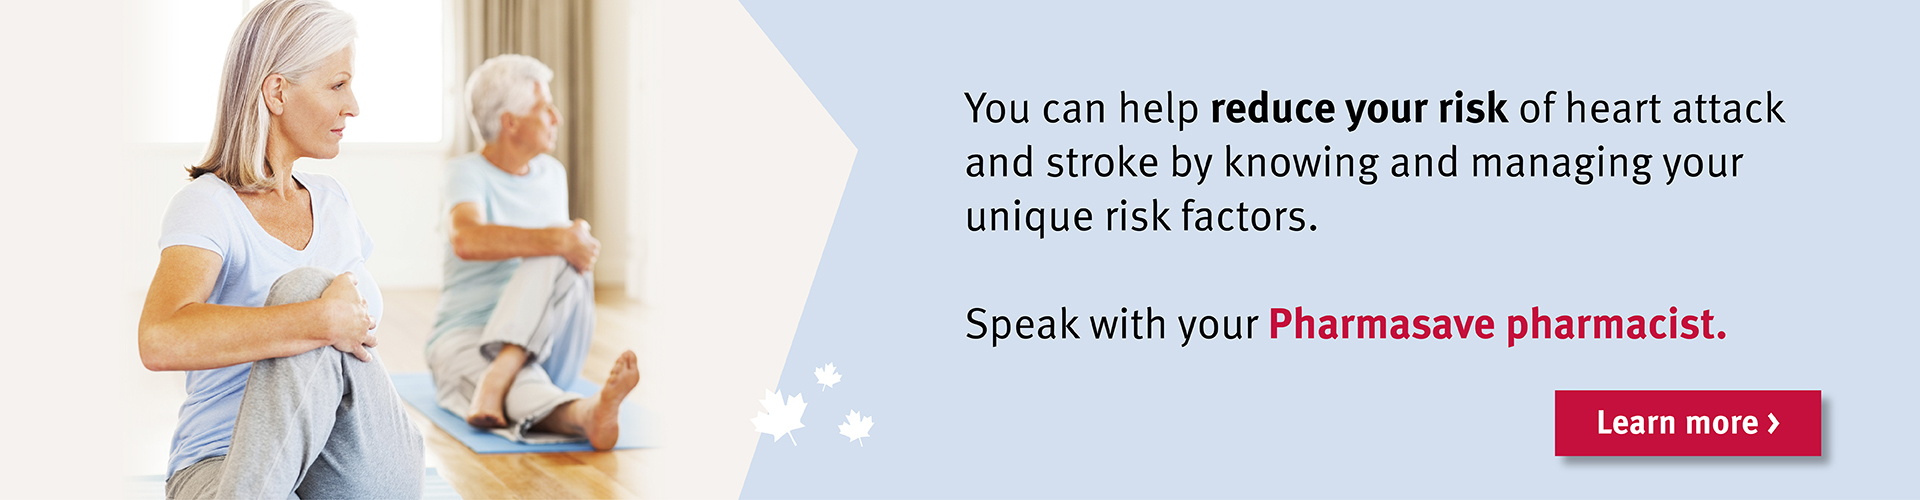 Reduce your risk of heart attack and stroke by knowing and managing unique risk factors. Speak with your Pharmasave pharmacist.